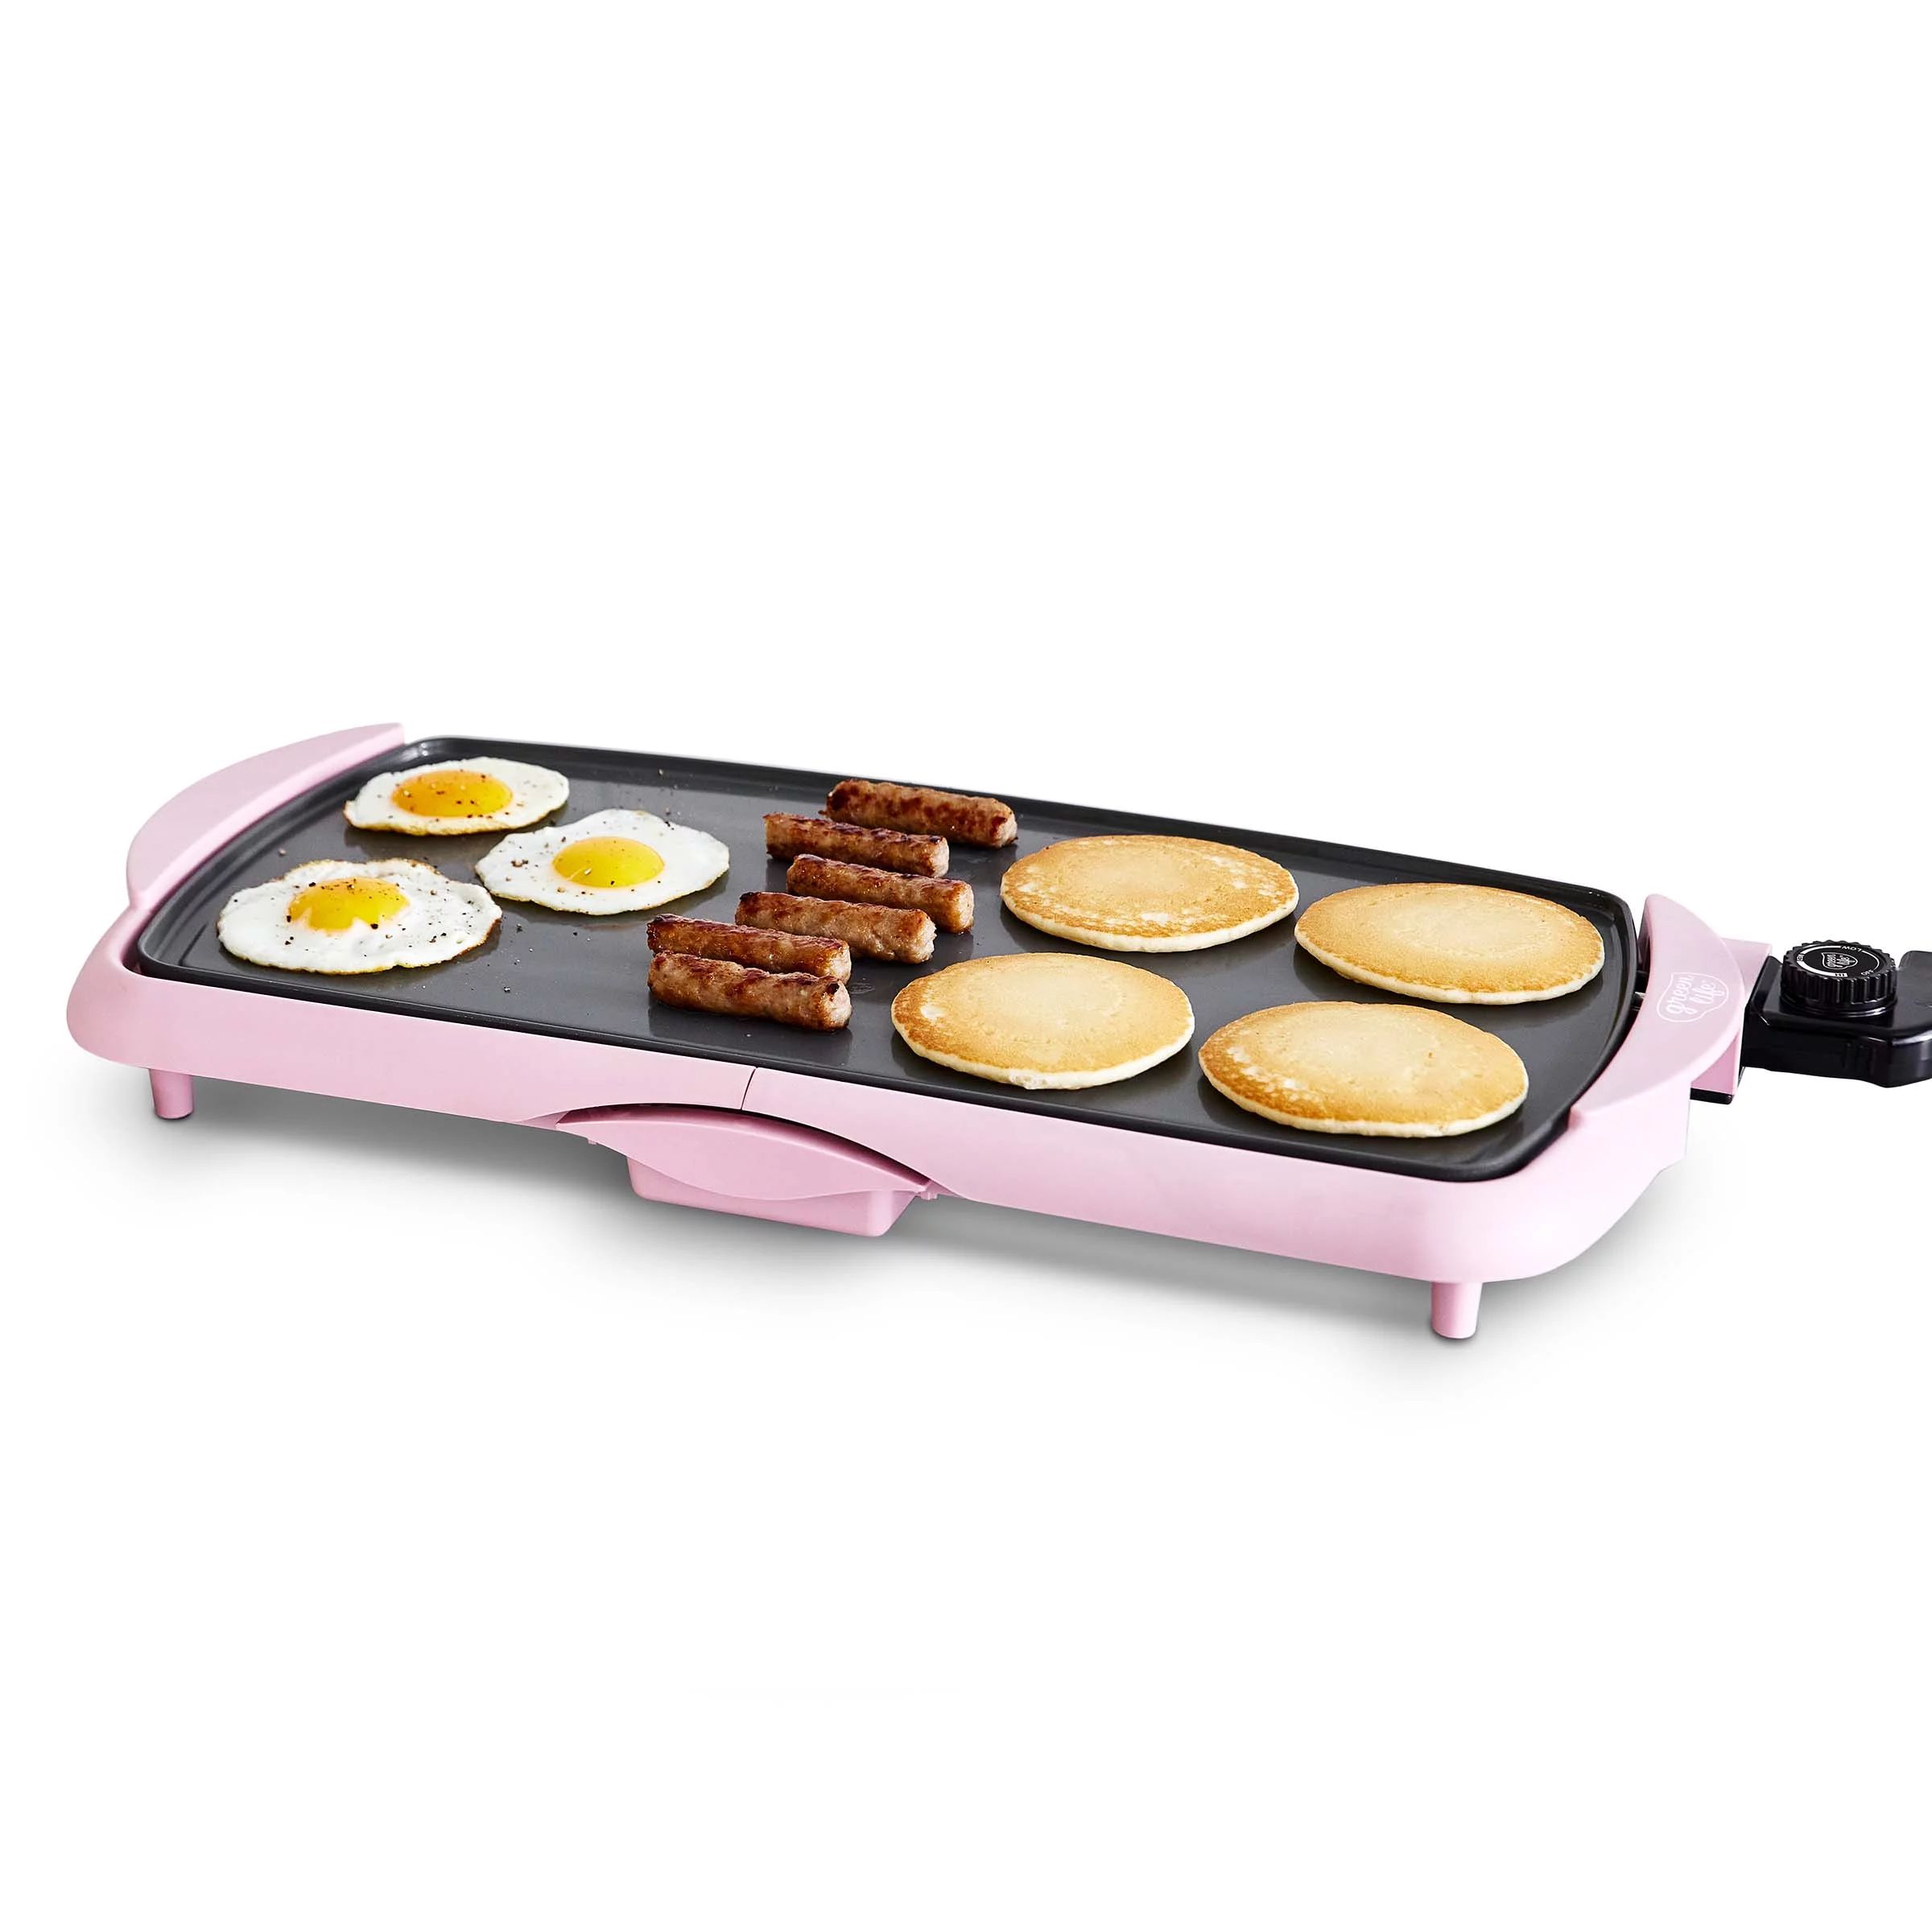 GreenLife Healthy Non-Stick Electric Griddle, Pink | Walmart (US)